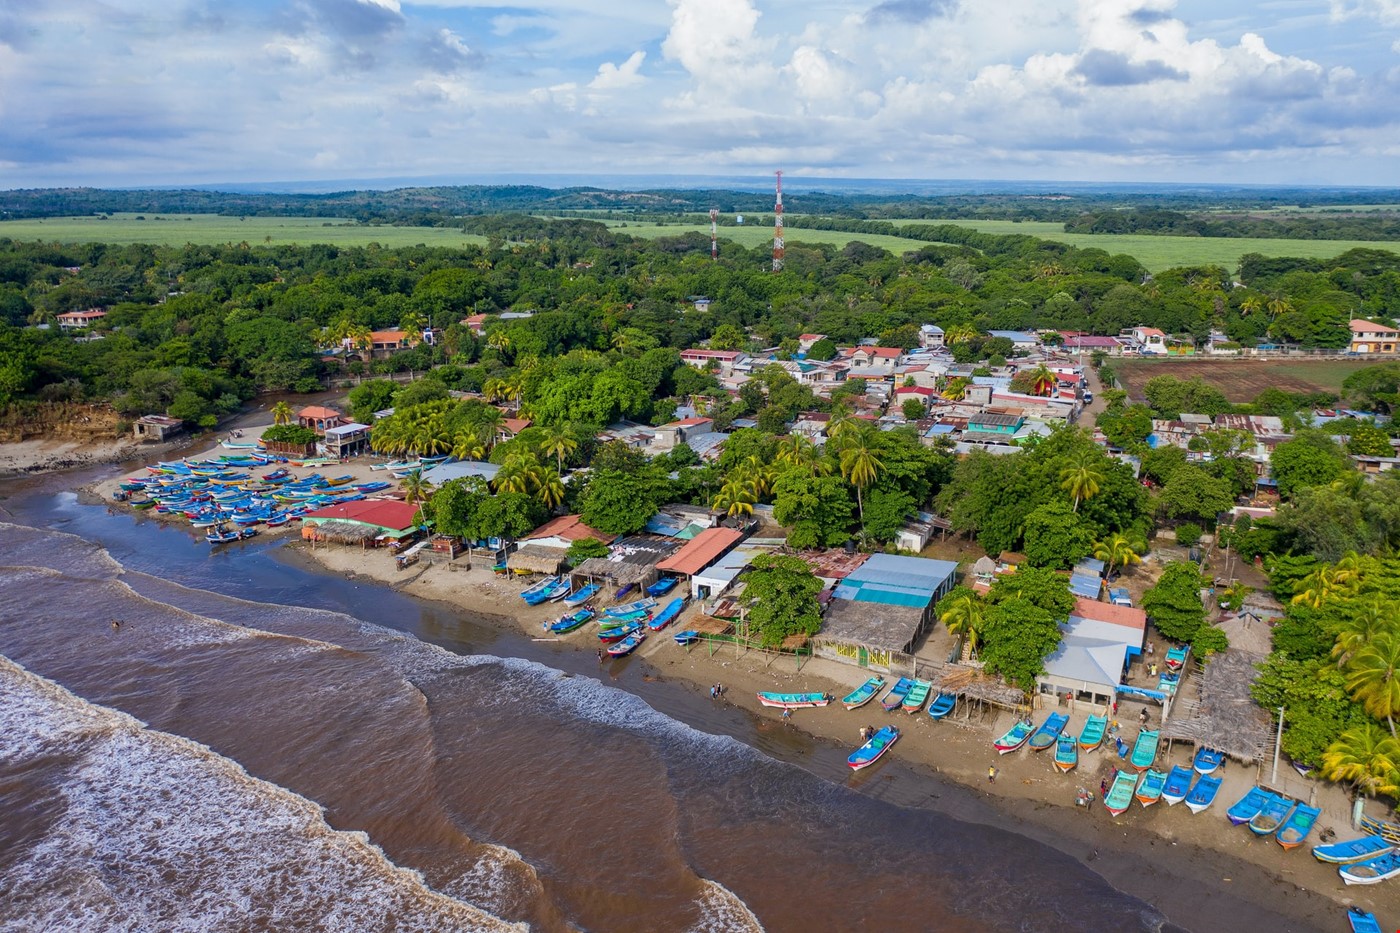 Digital Nomads accommodation in Nicaraguan Pacific Coast)